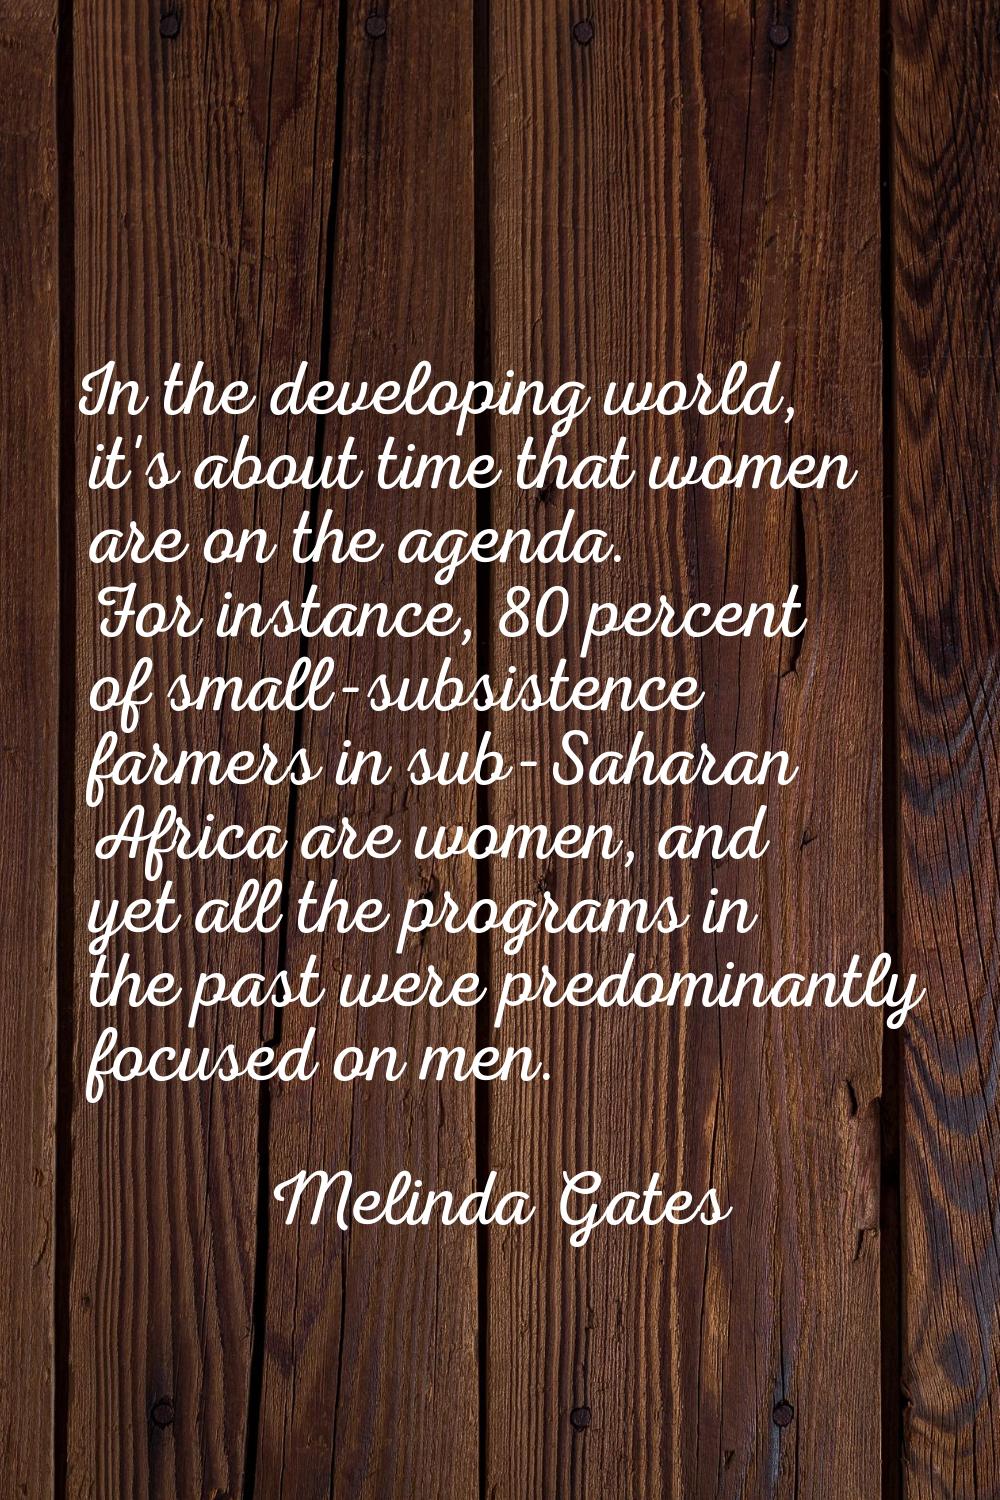 In the developing world, it's about time that women are on the agenda. For instance, 80 percent of 